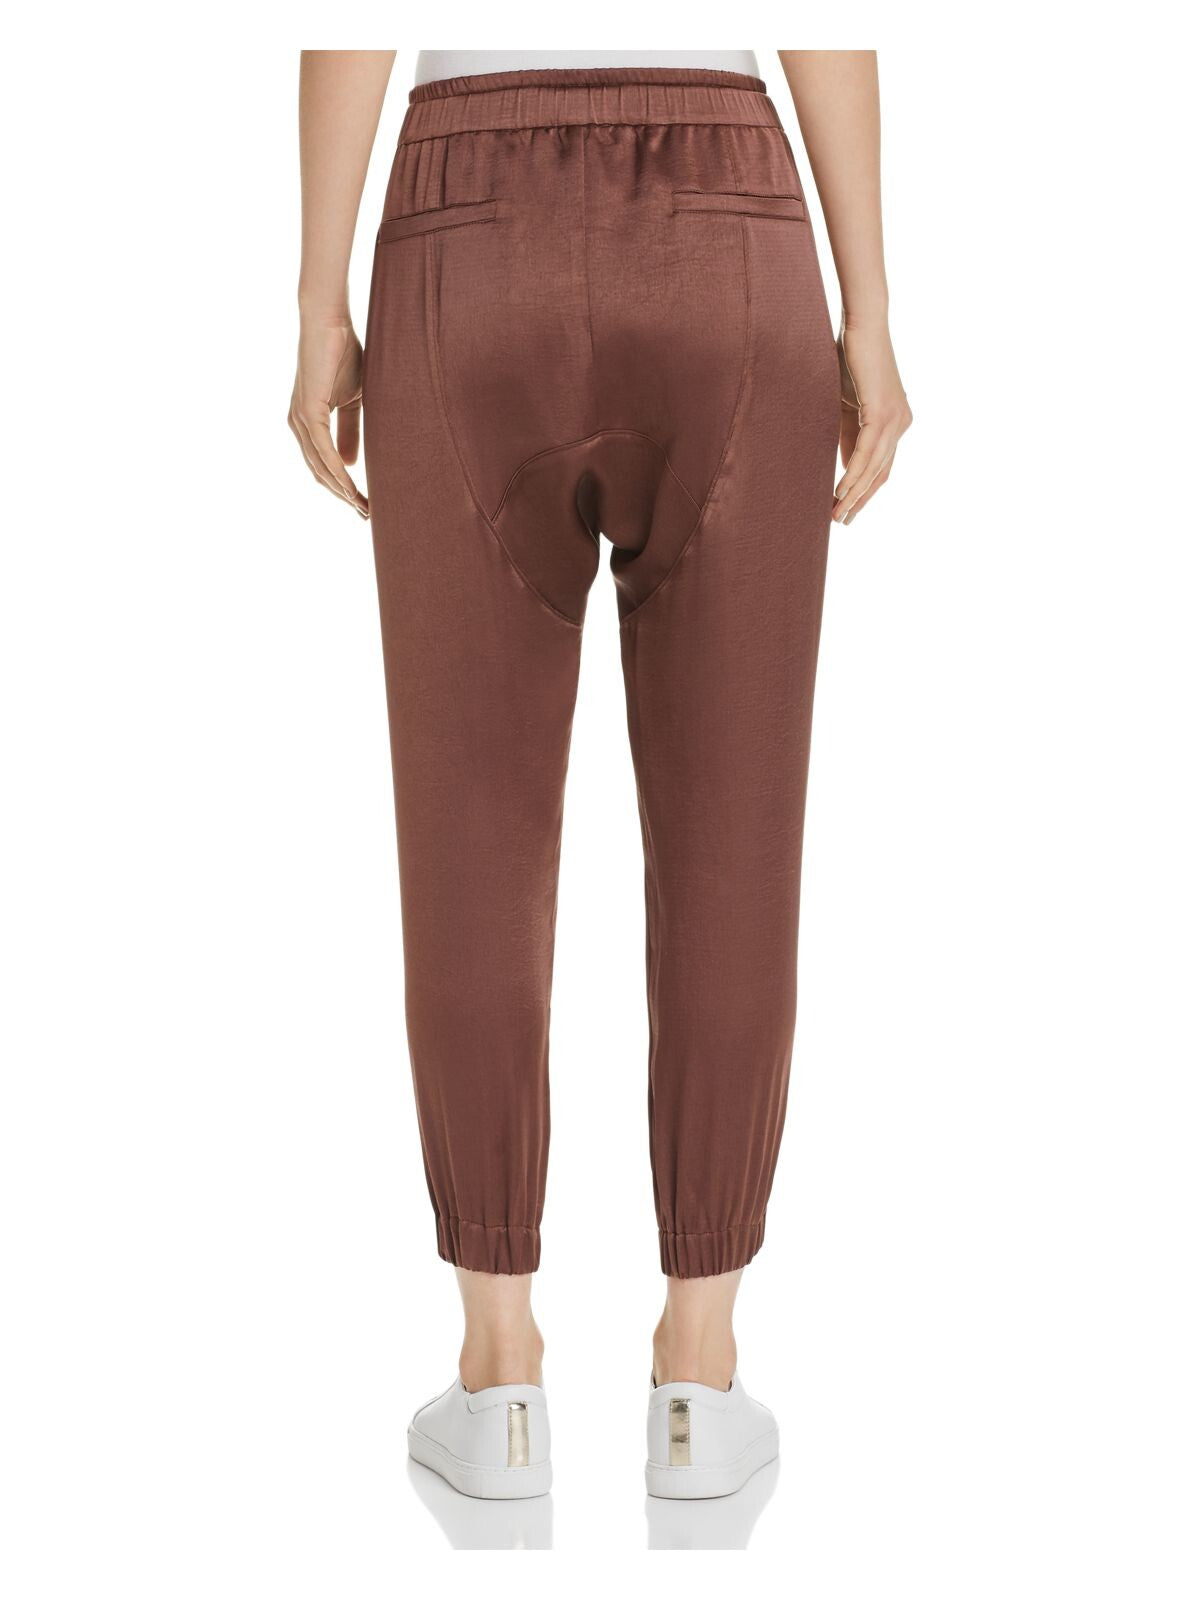 JOIE Womens Brown Belted Cropped Pants Size: XL